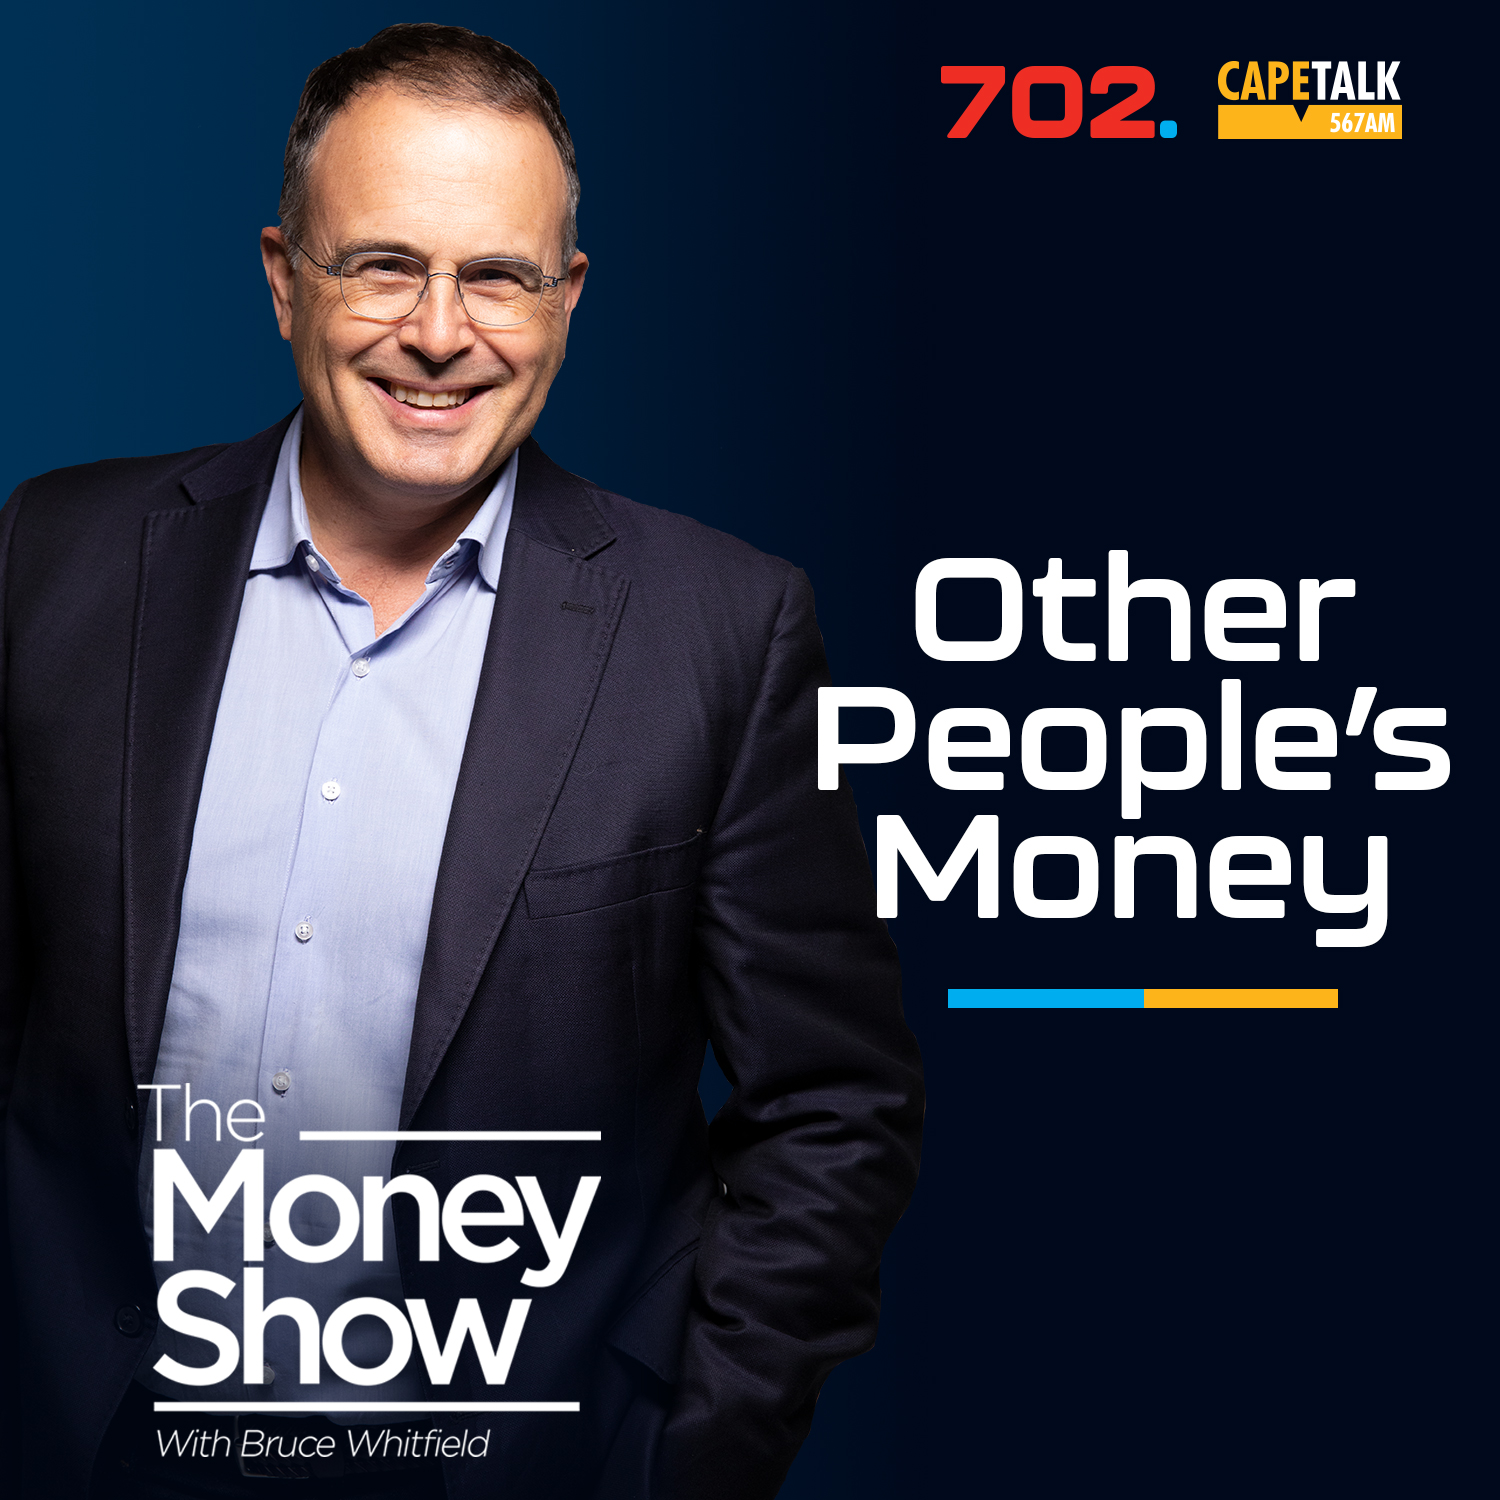 Other People’s Money - Eugene Khoza, comedian, actor and television personality